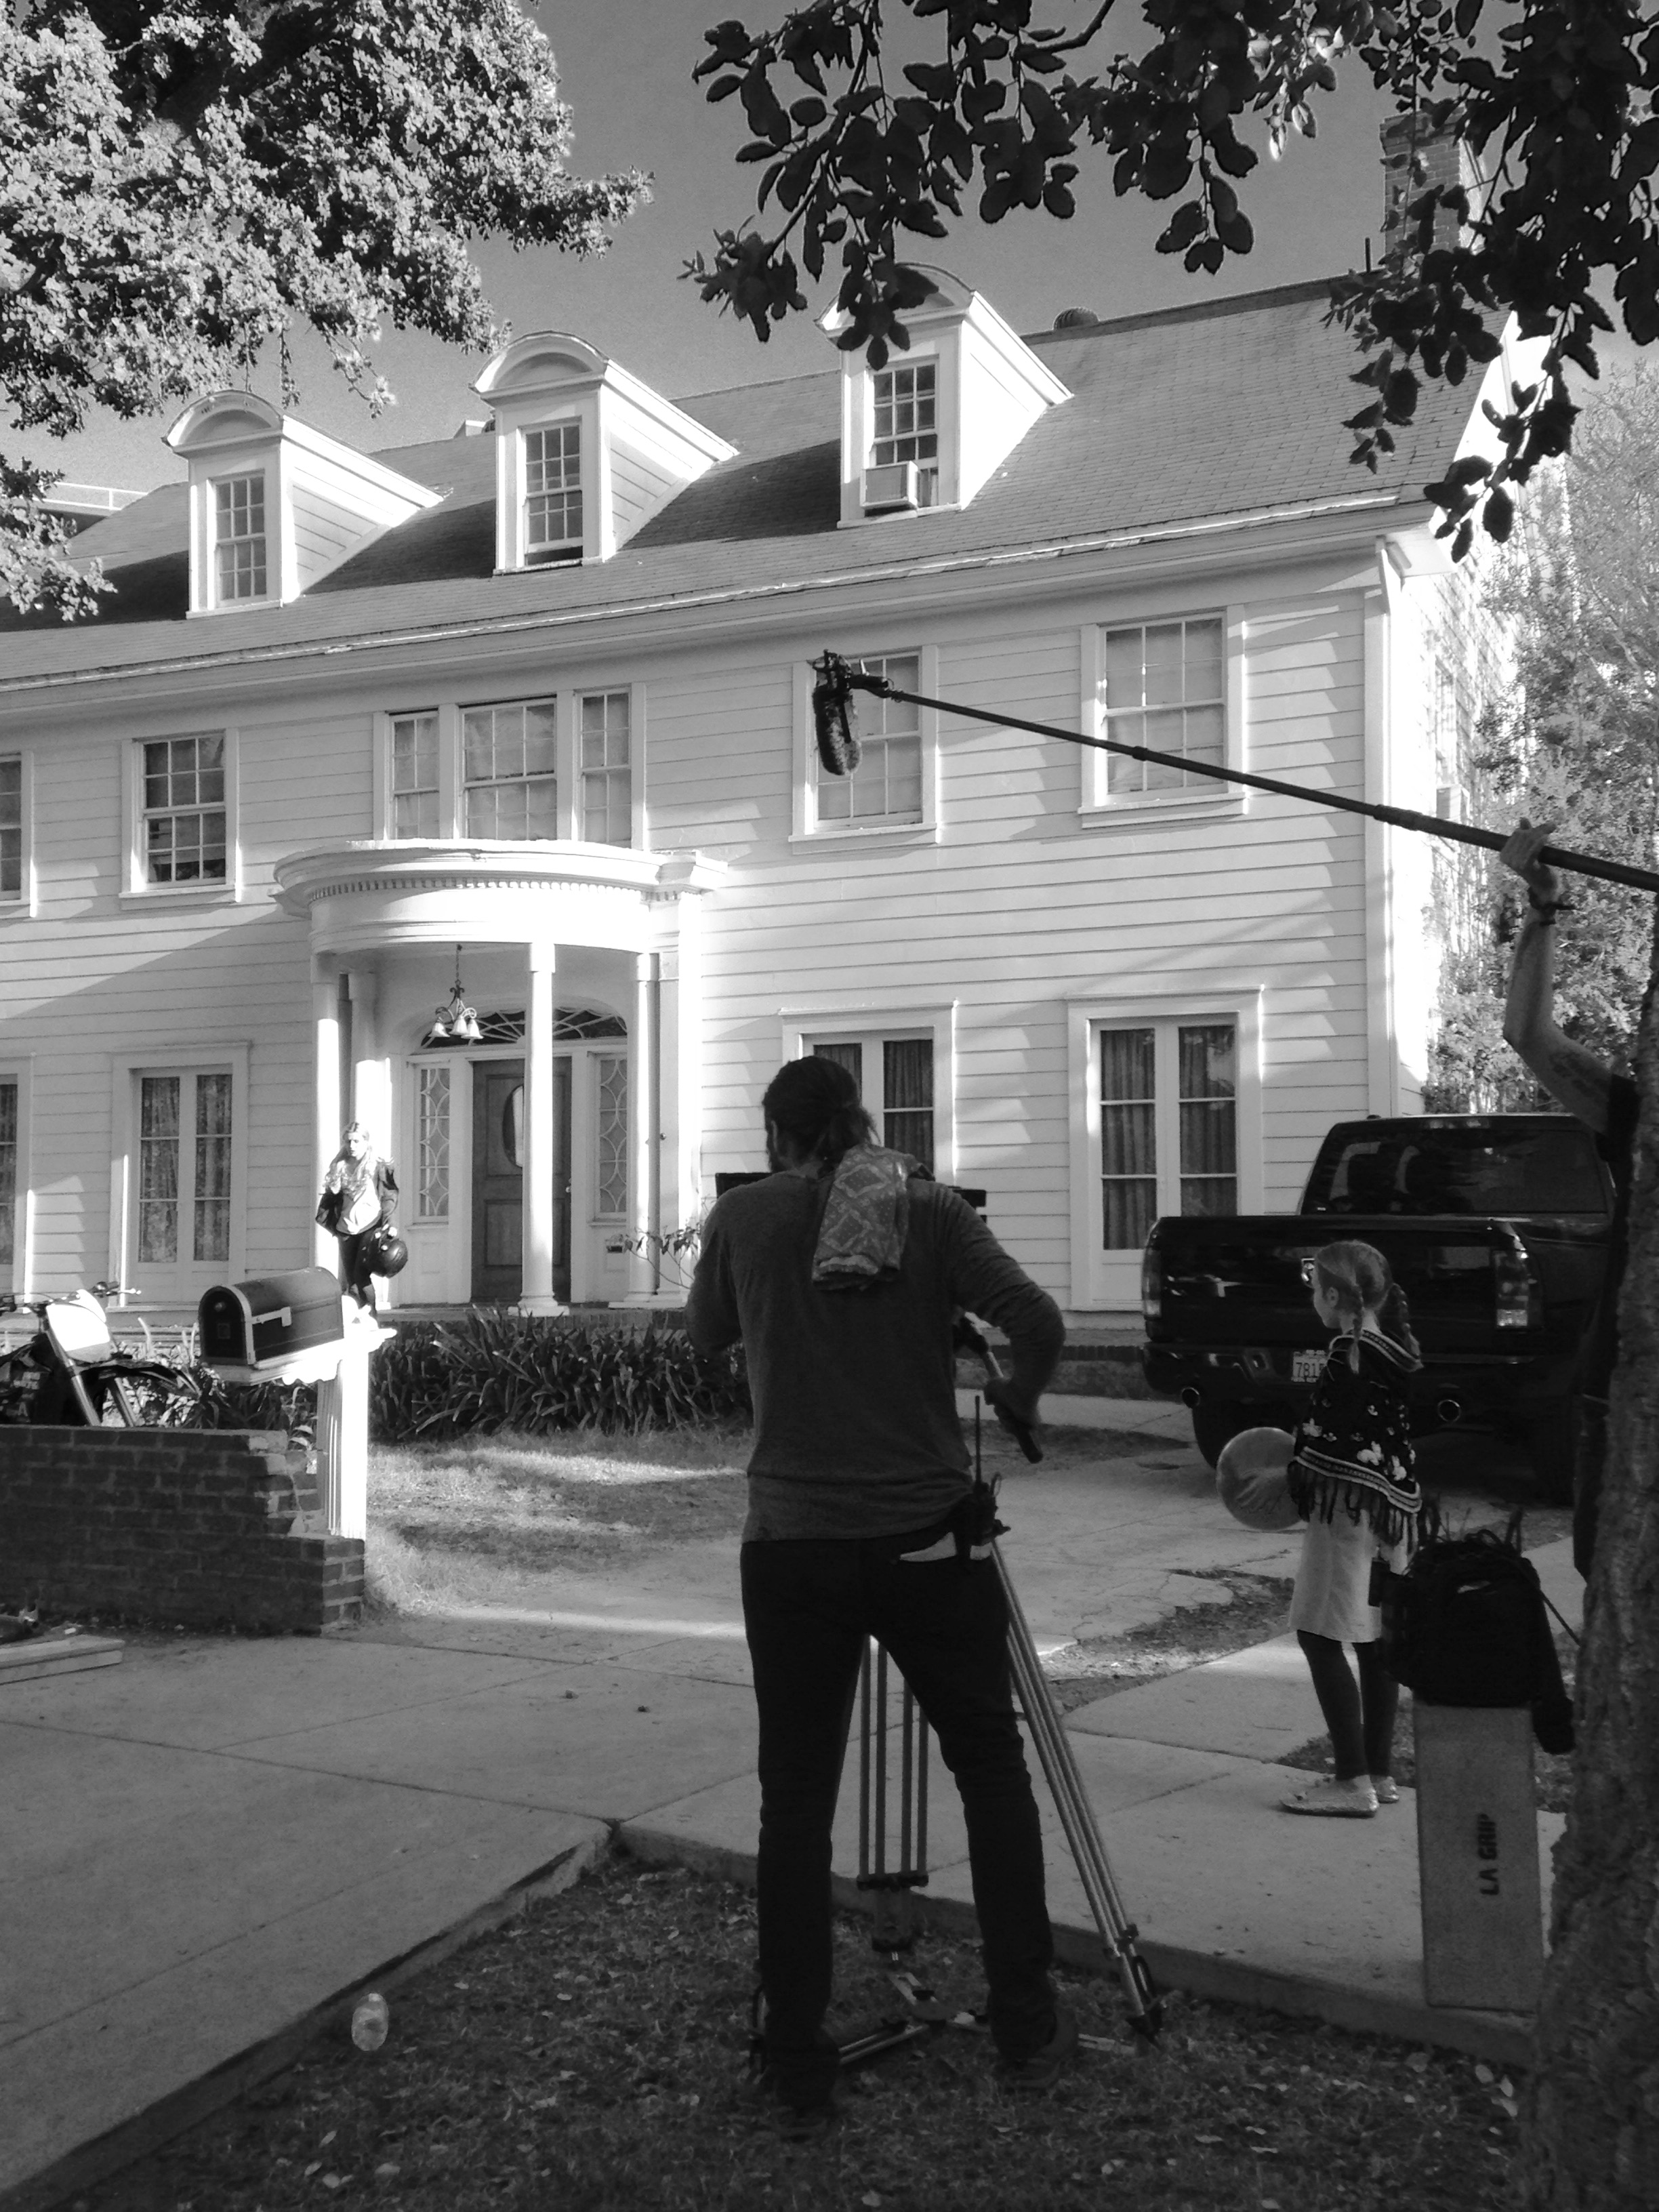 Behind the scenes of Amityville Terror with Julia Rae as Penny and Nicole Tompkins as Hailey.